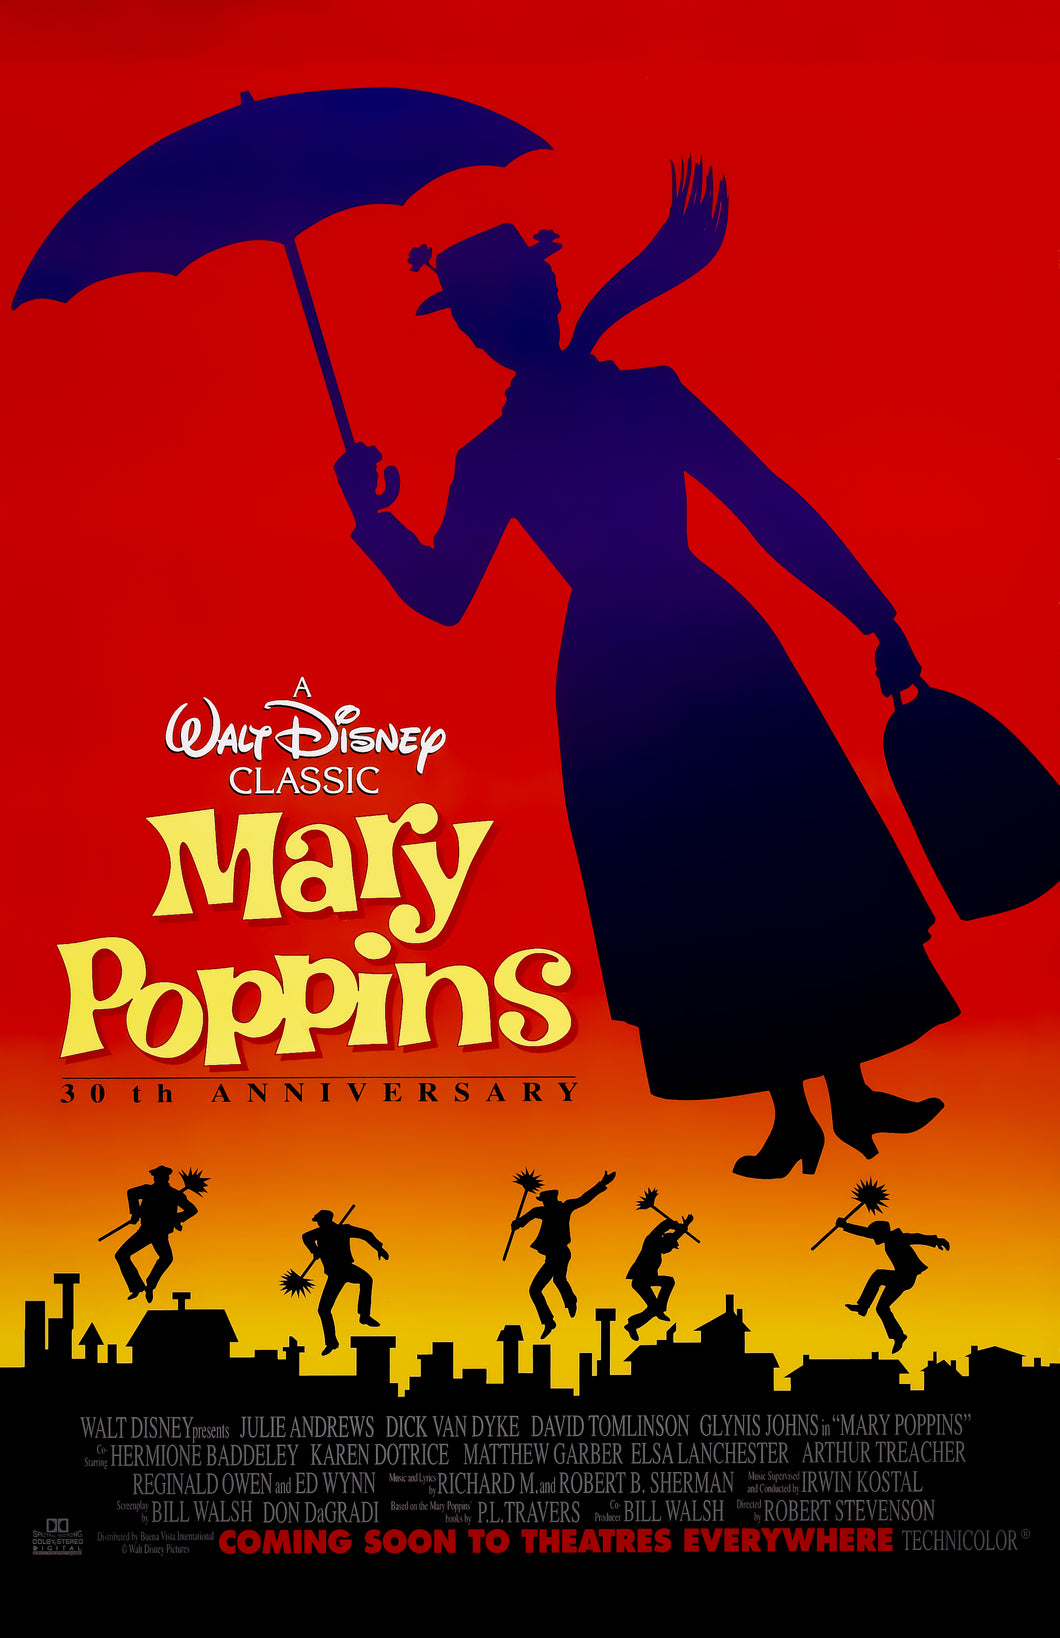 Karen Dotrice signed Mary Poppins poster photo Image #3 (8x10, 11x17)